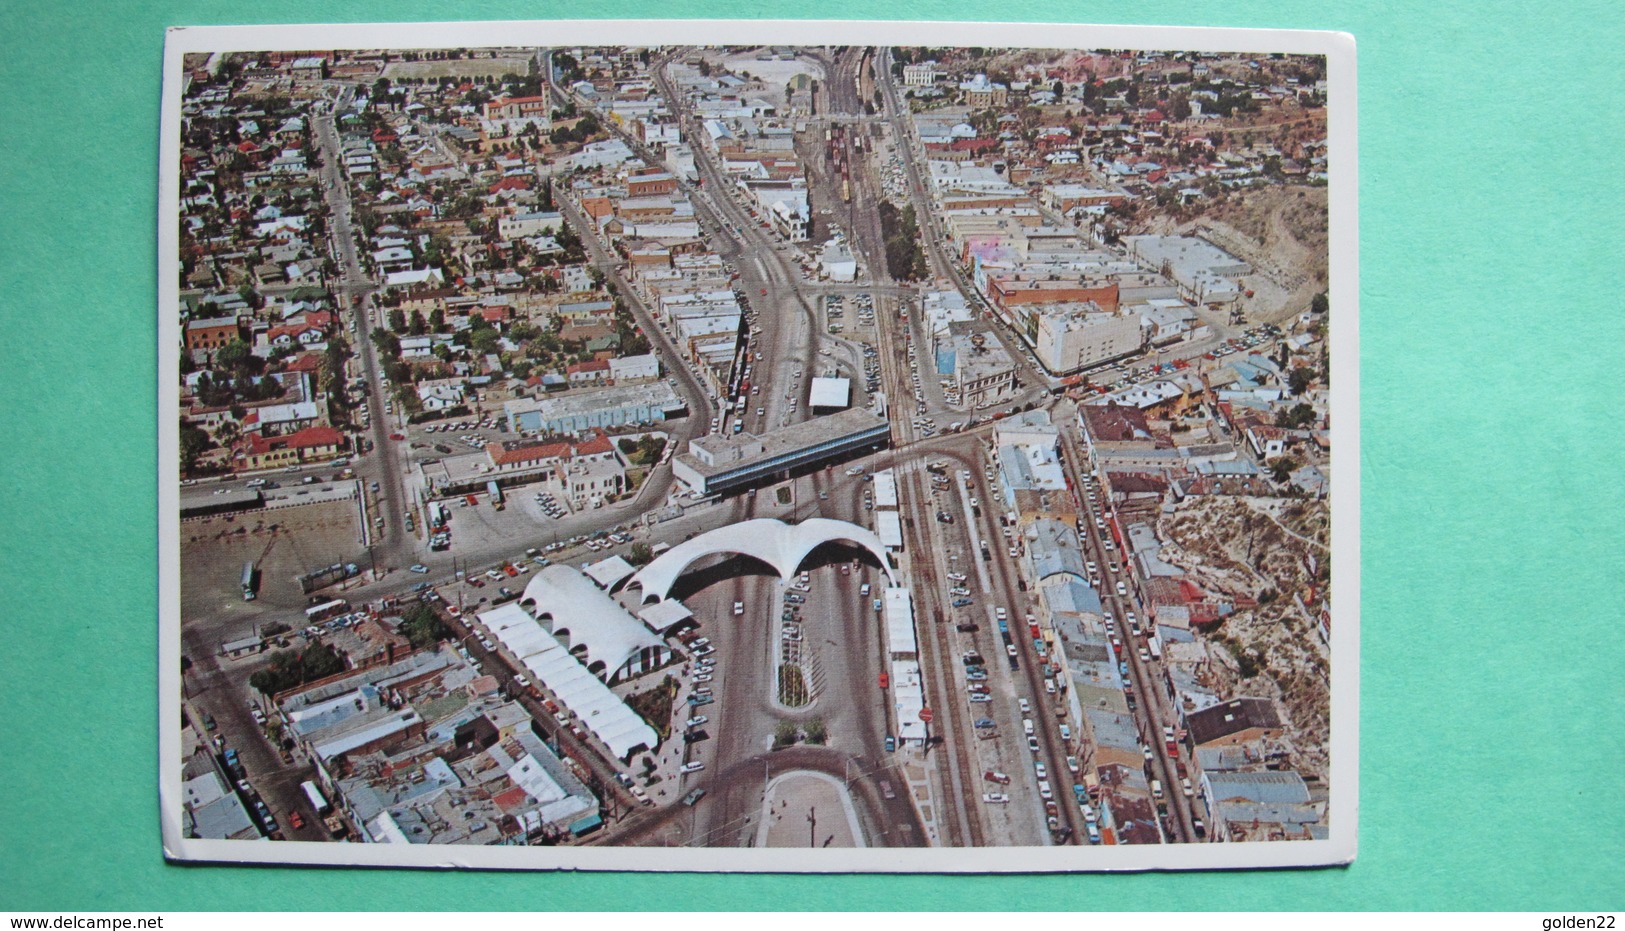 Birdseye View Of Mexican & United States Immigration Stations Nogales, Arizona And Mexico - Tucson